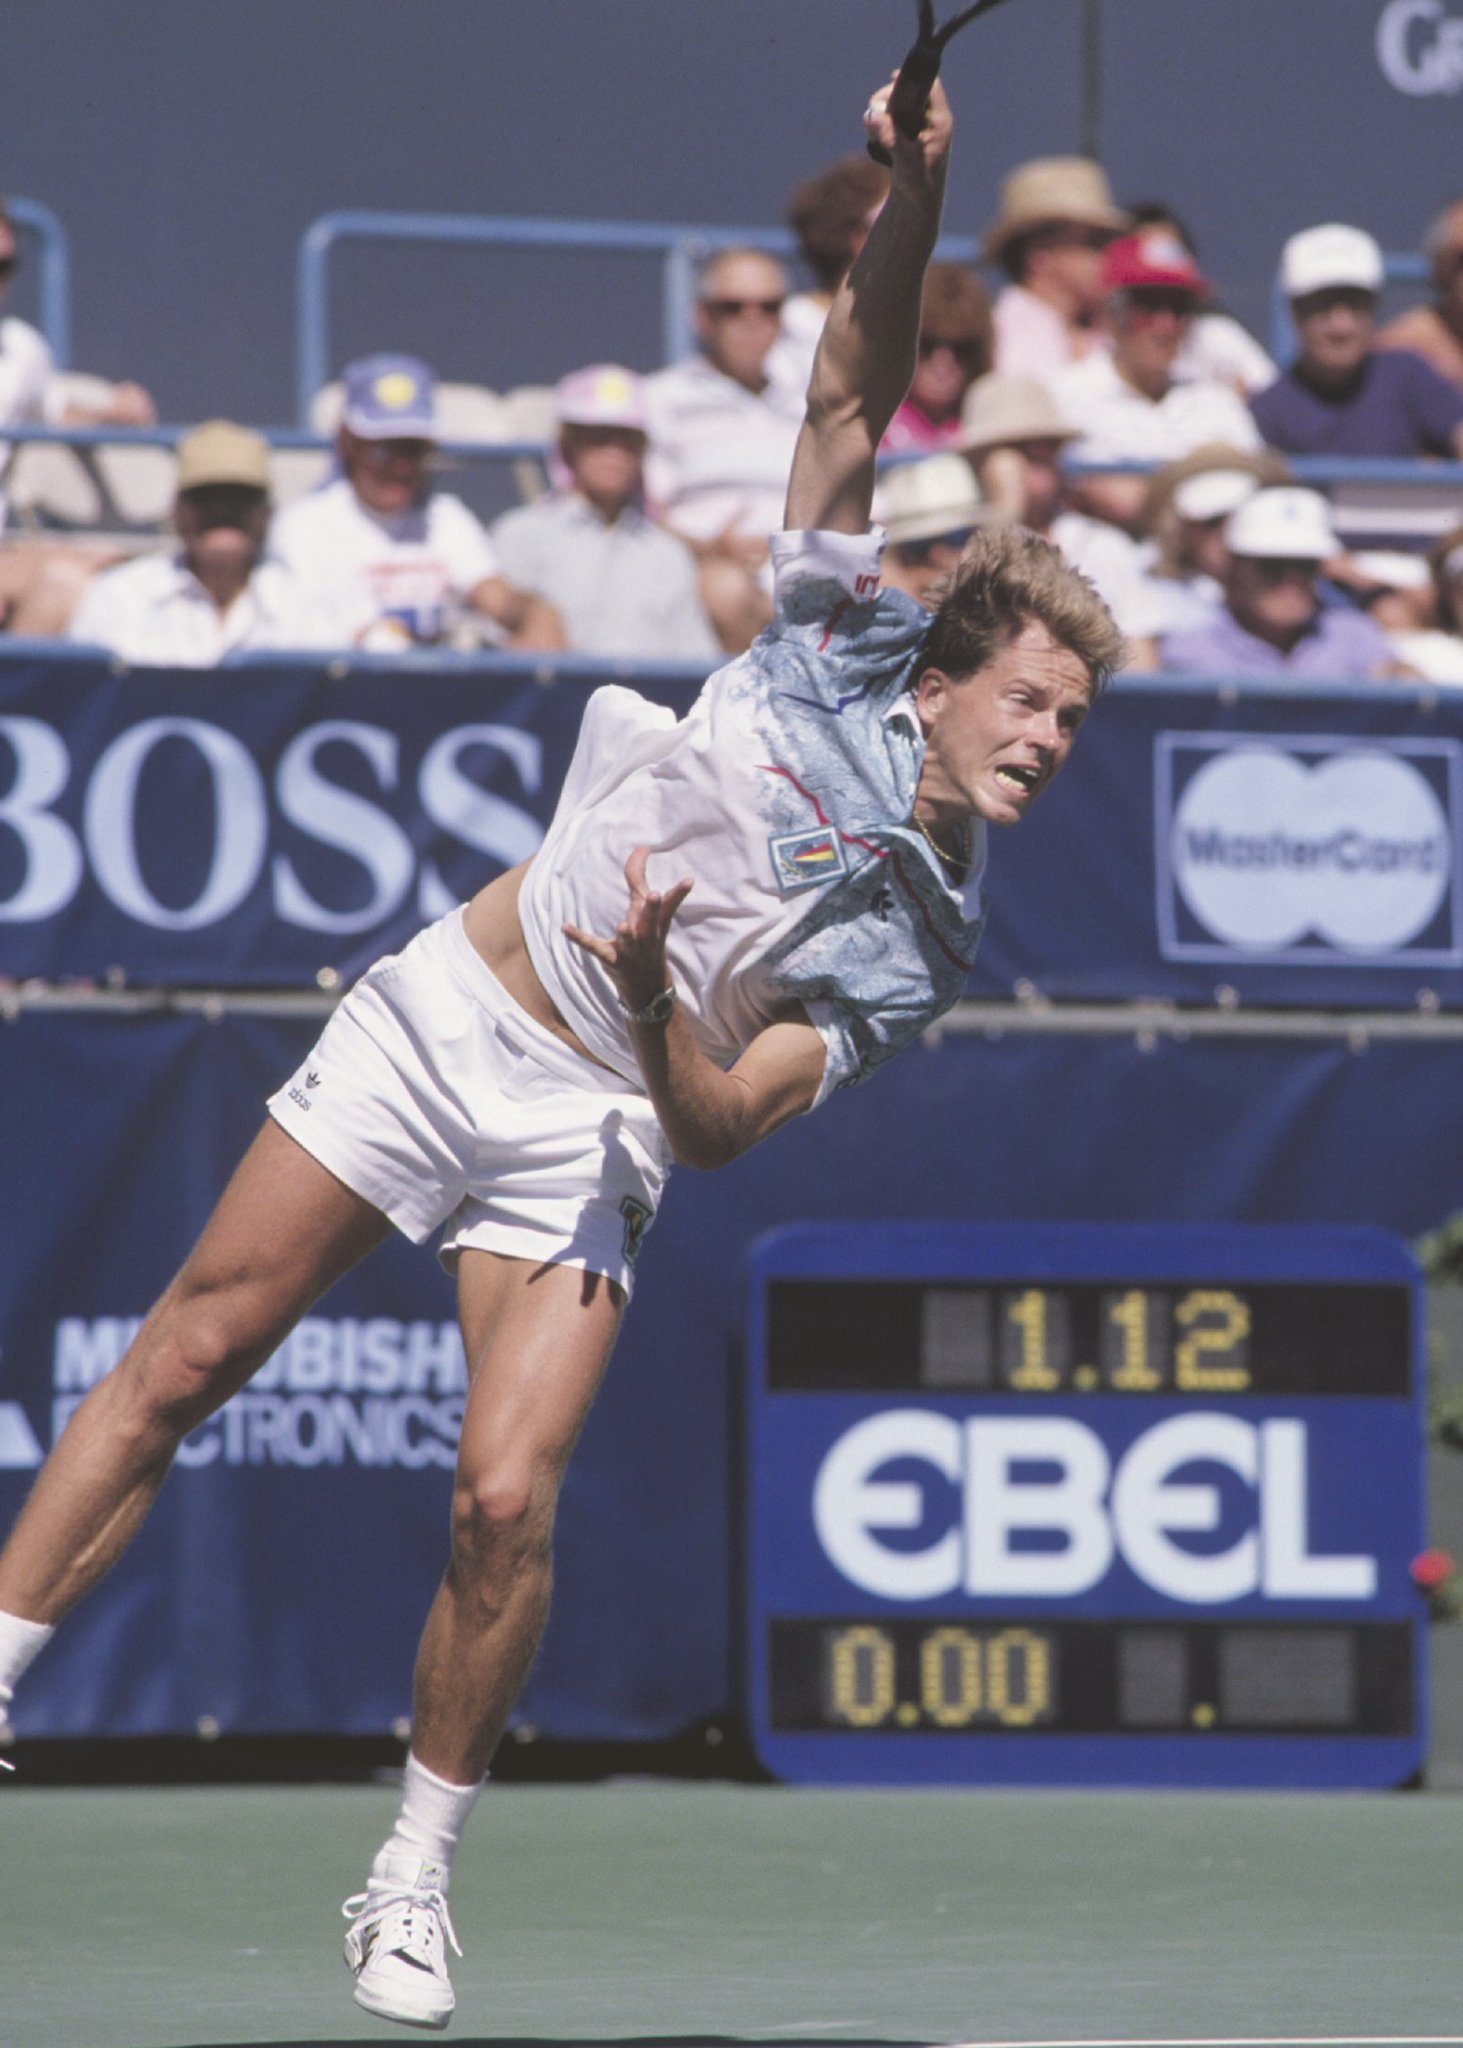 Happy Birthday to 9-time major champion and former world No. 1, the great serve and volleyer Stefan Edberg  